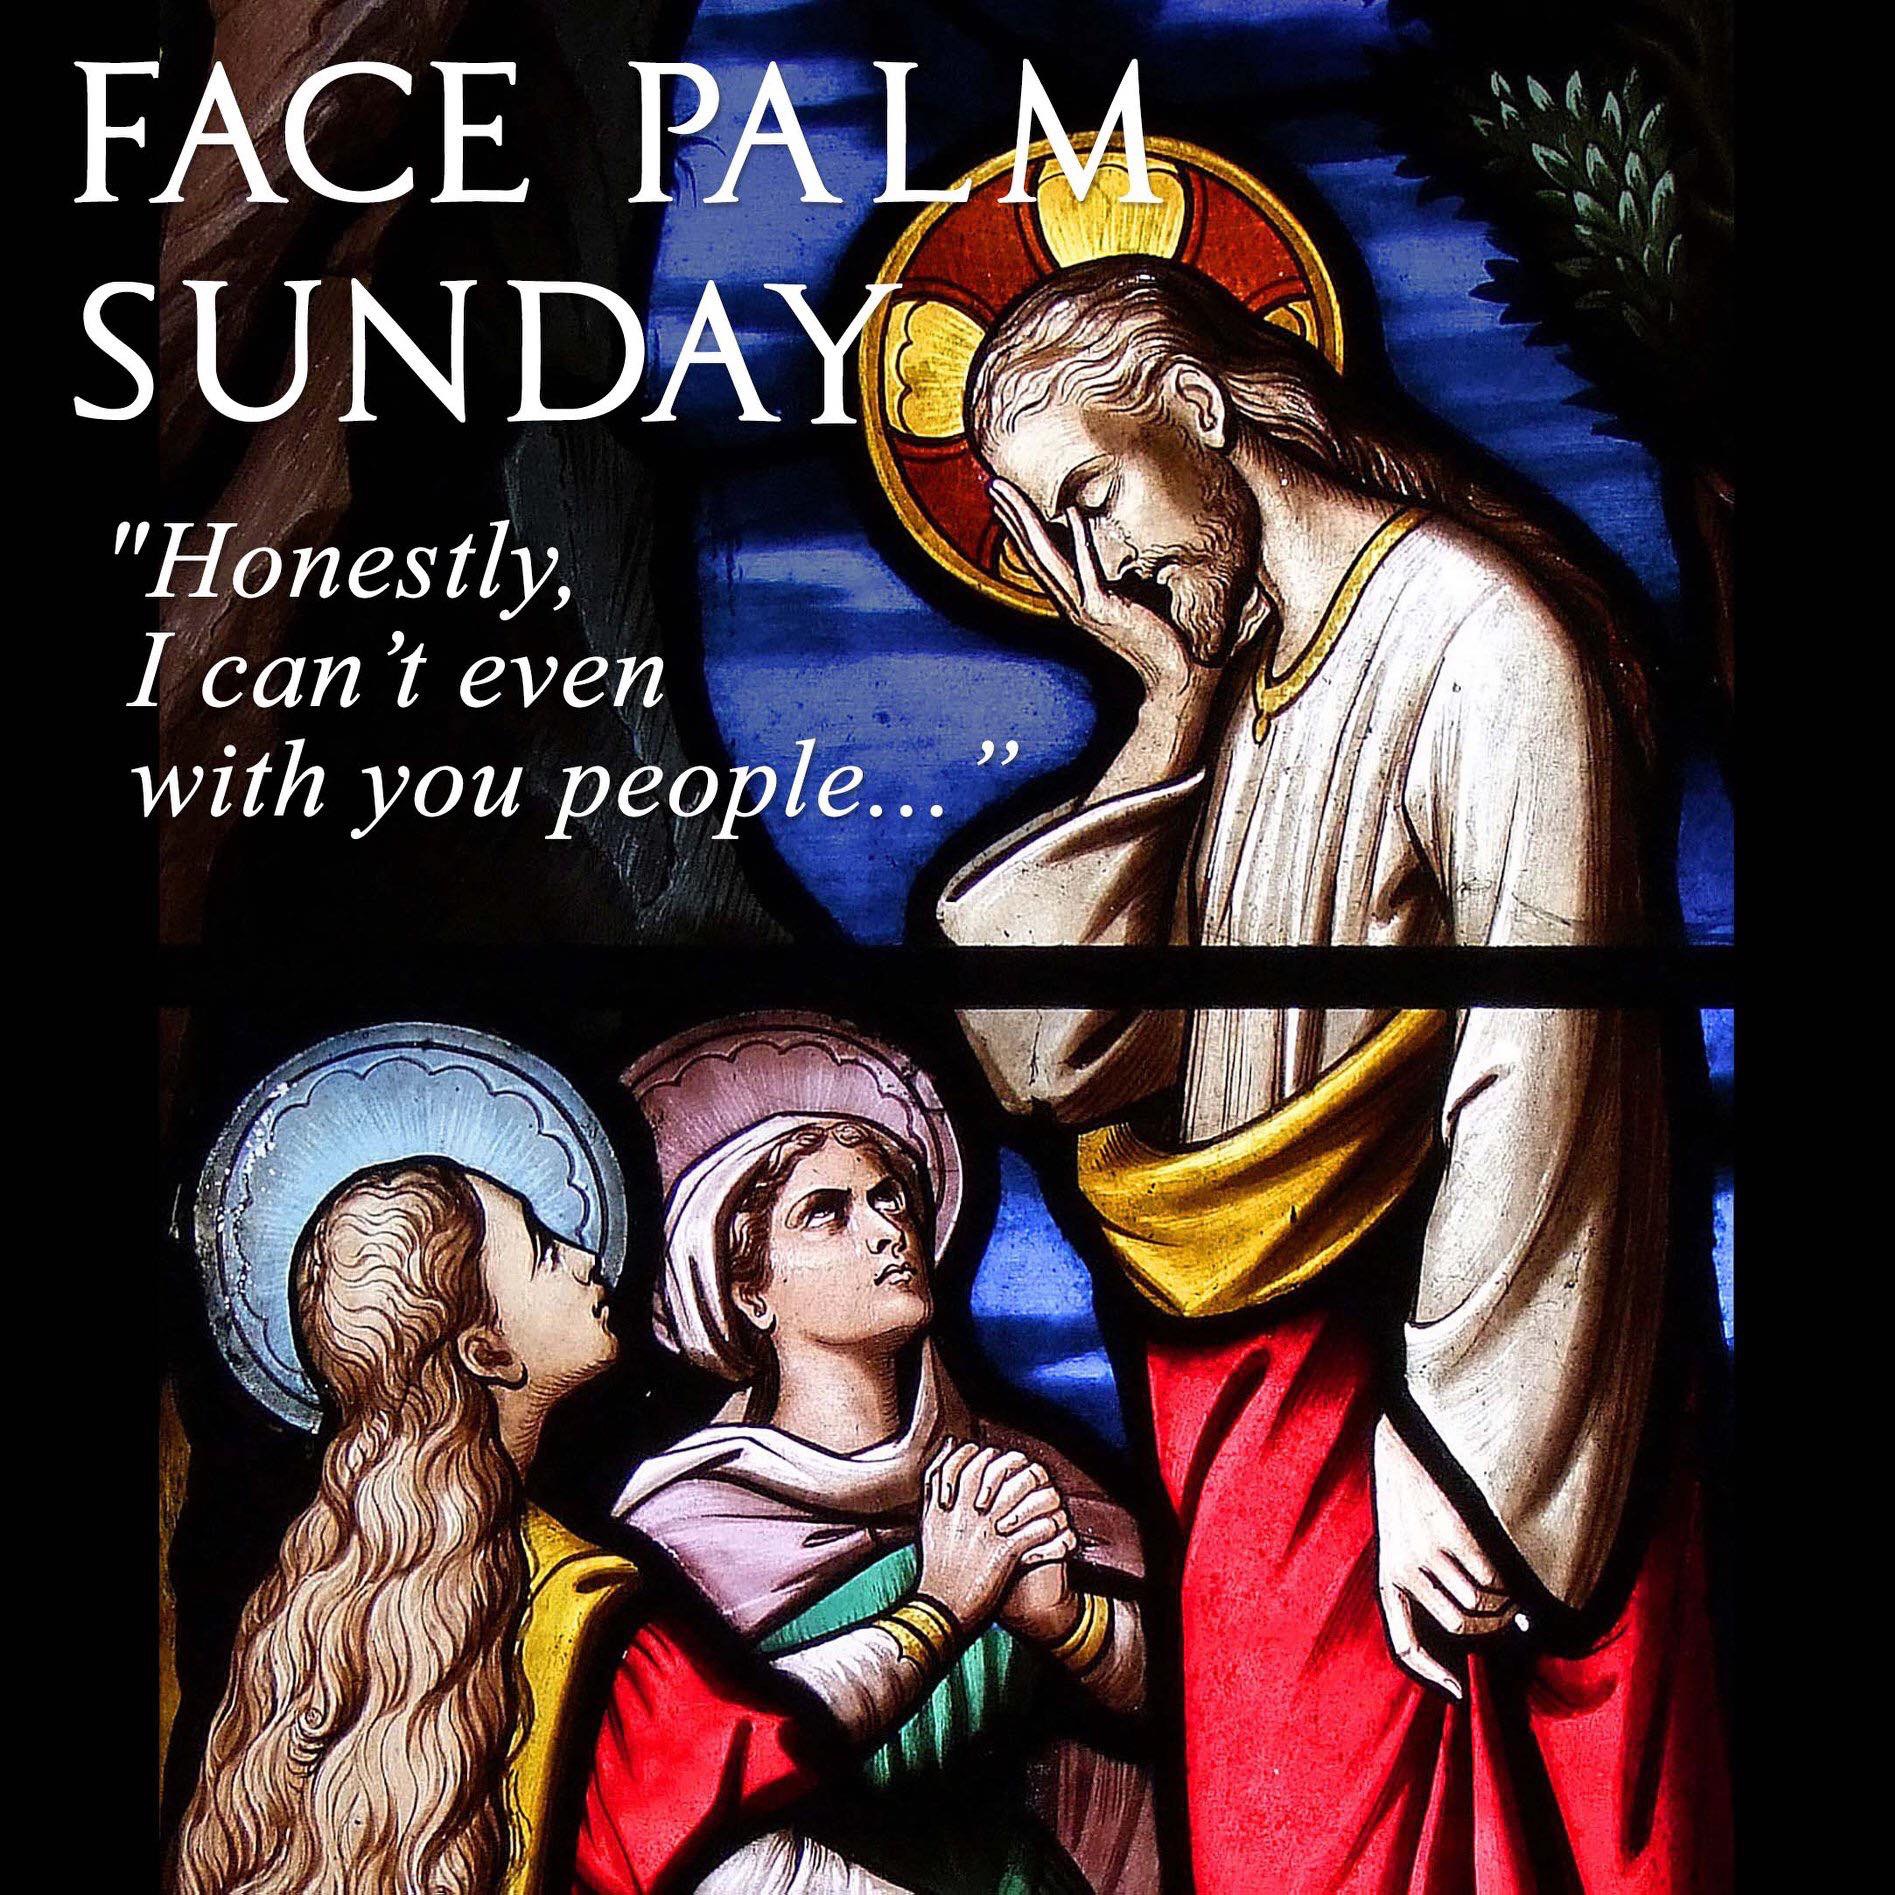 stained glass - Face Palm Sunday "Honestly, I can't even with you people...